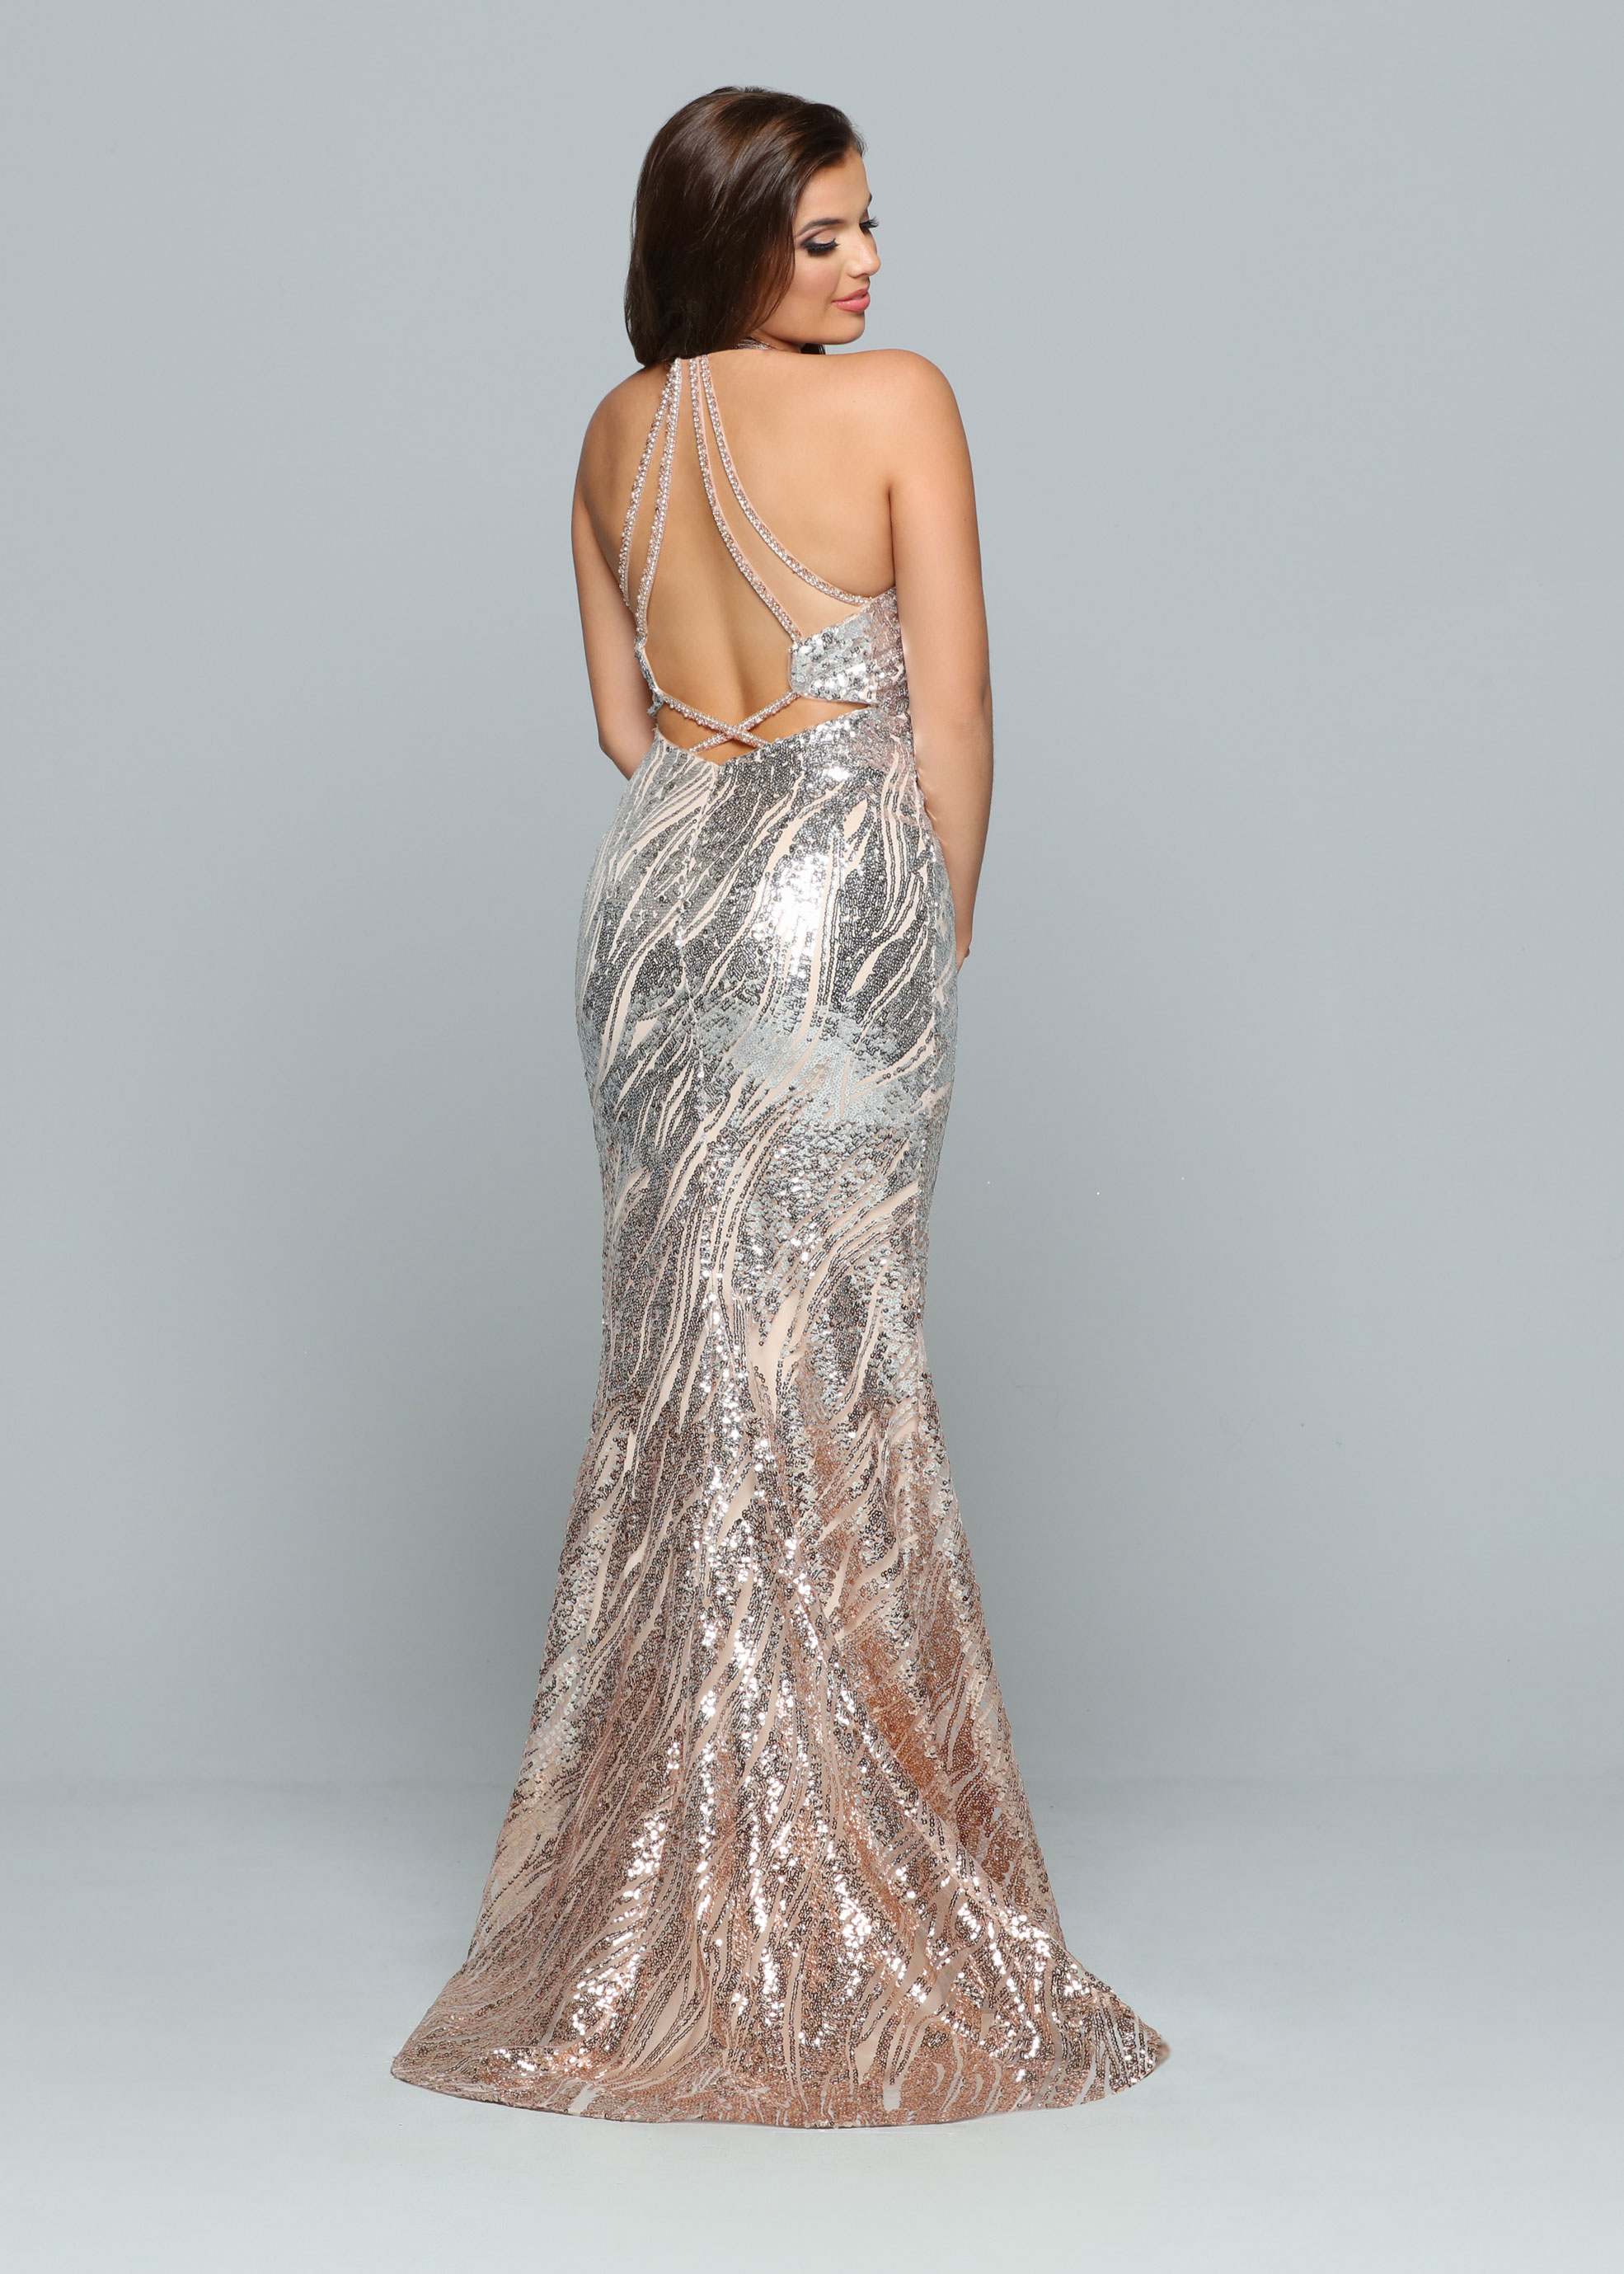 Image showing back view of style #72186